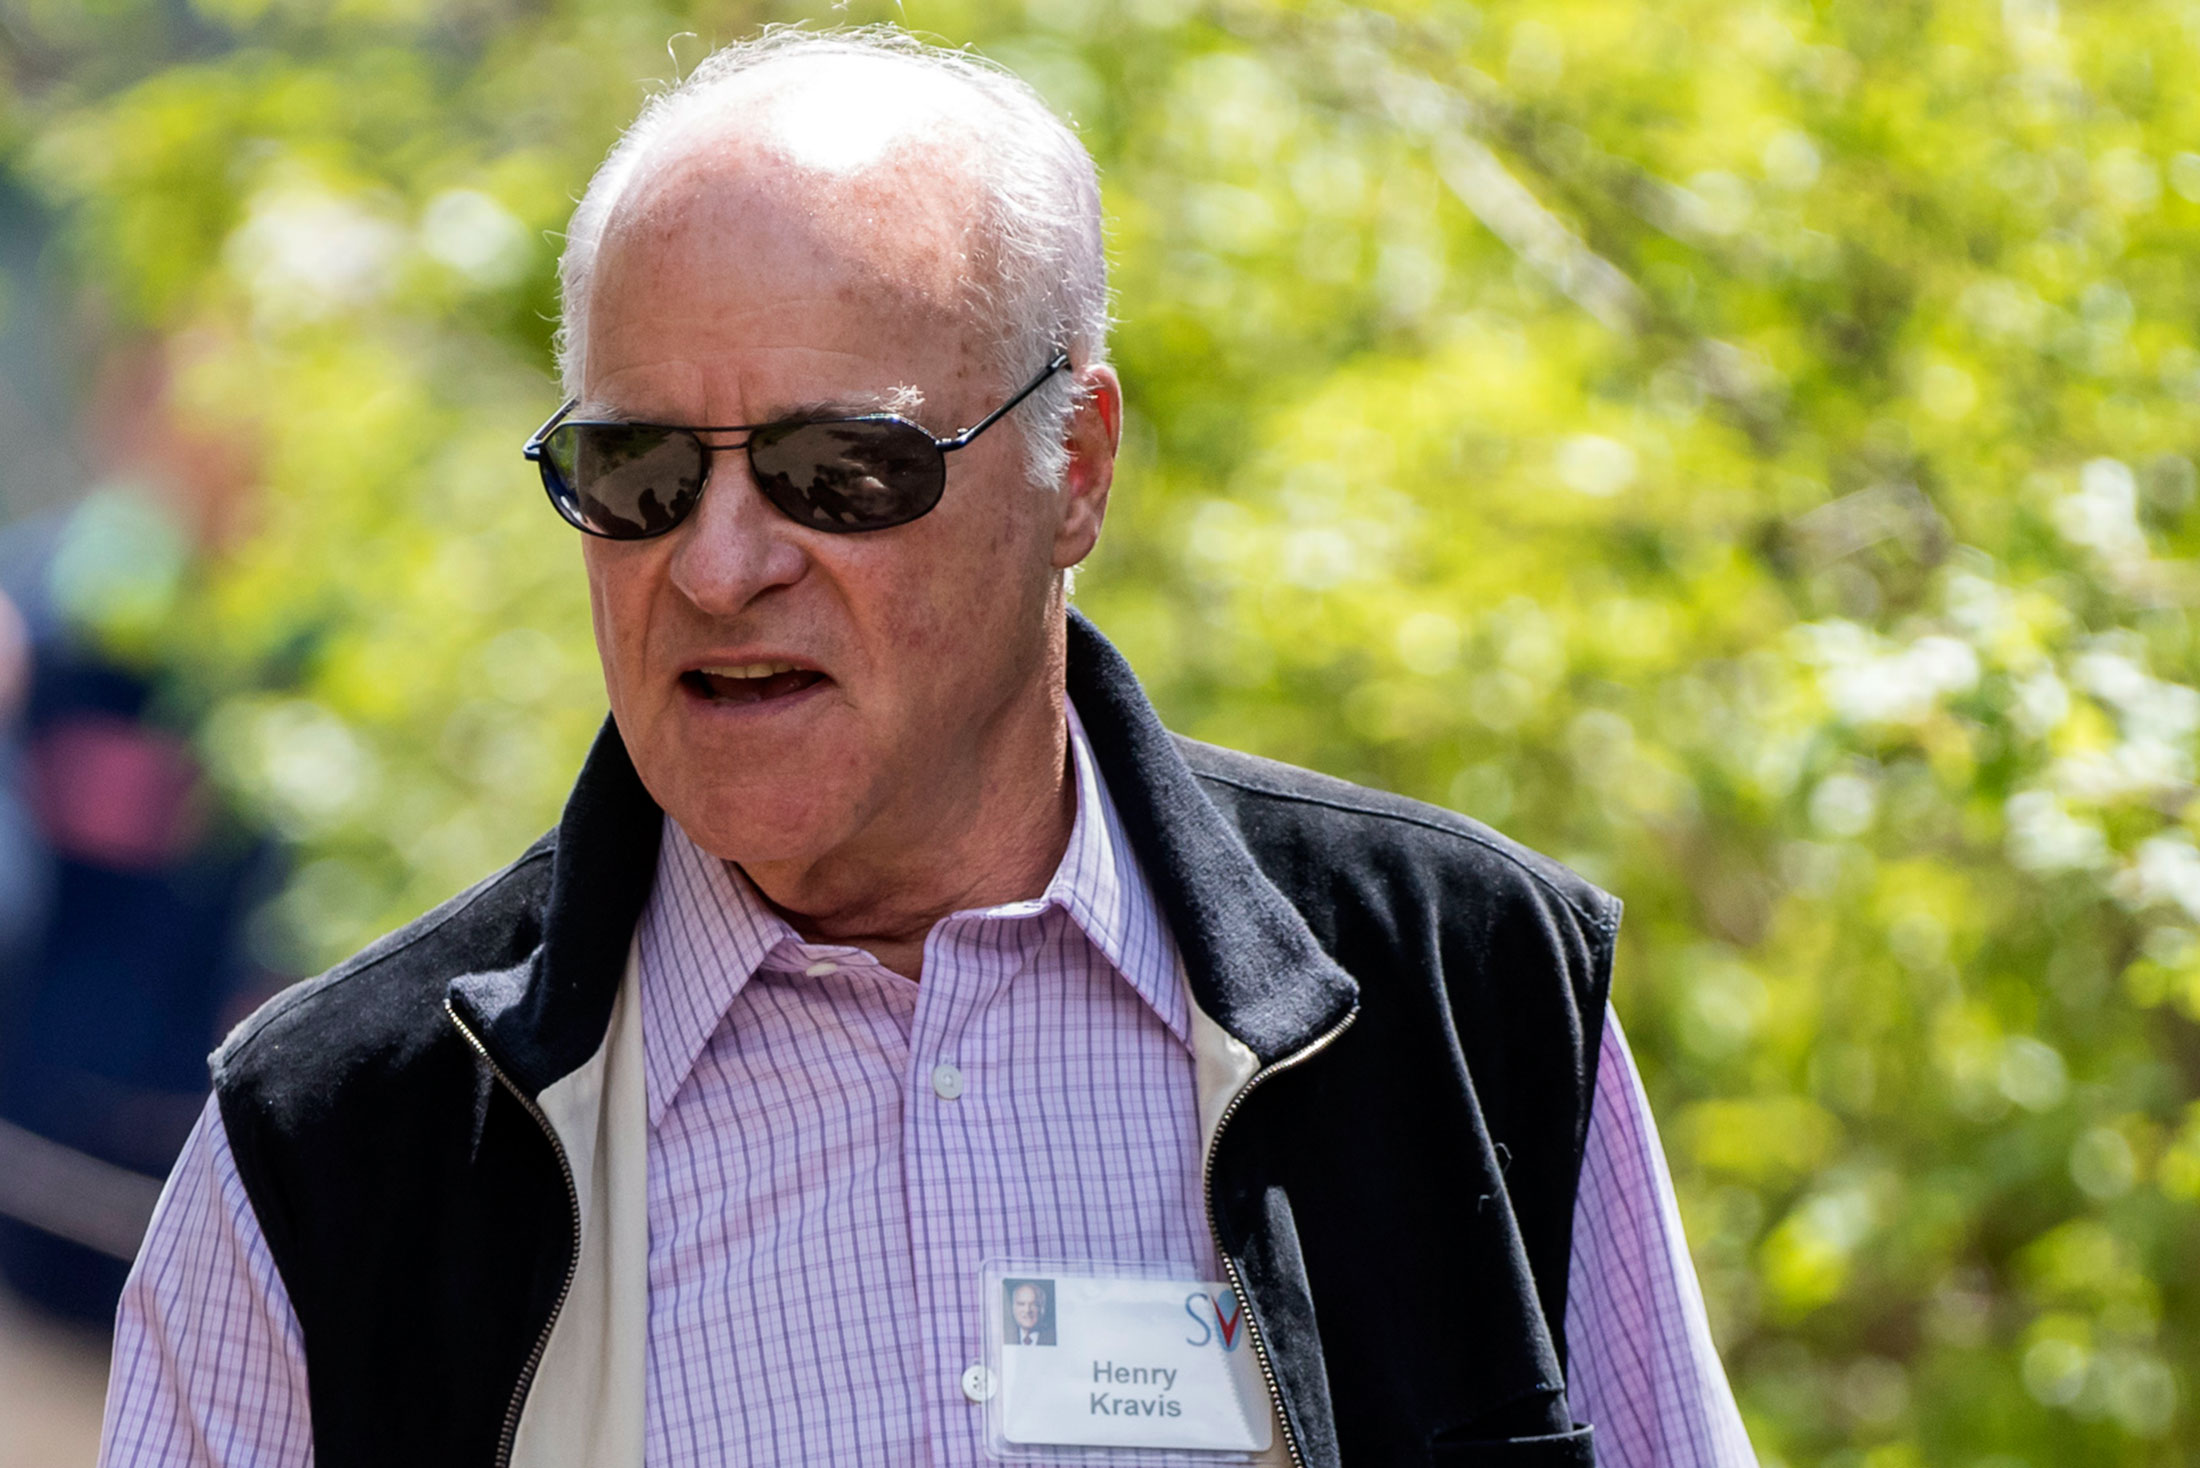 KKR co-founder Henry Kravis is backing an e-commerce startup that calls itself a cross between Whole Foods and Costco.
